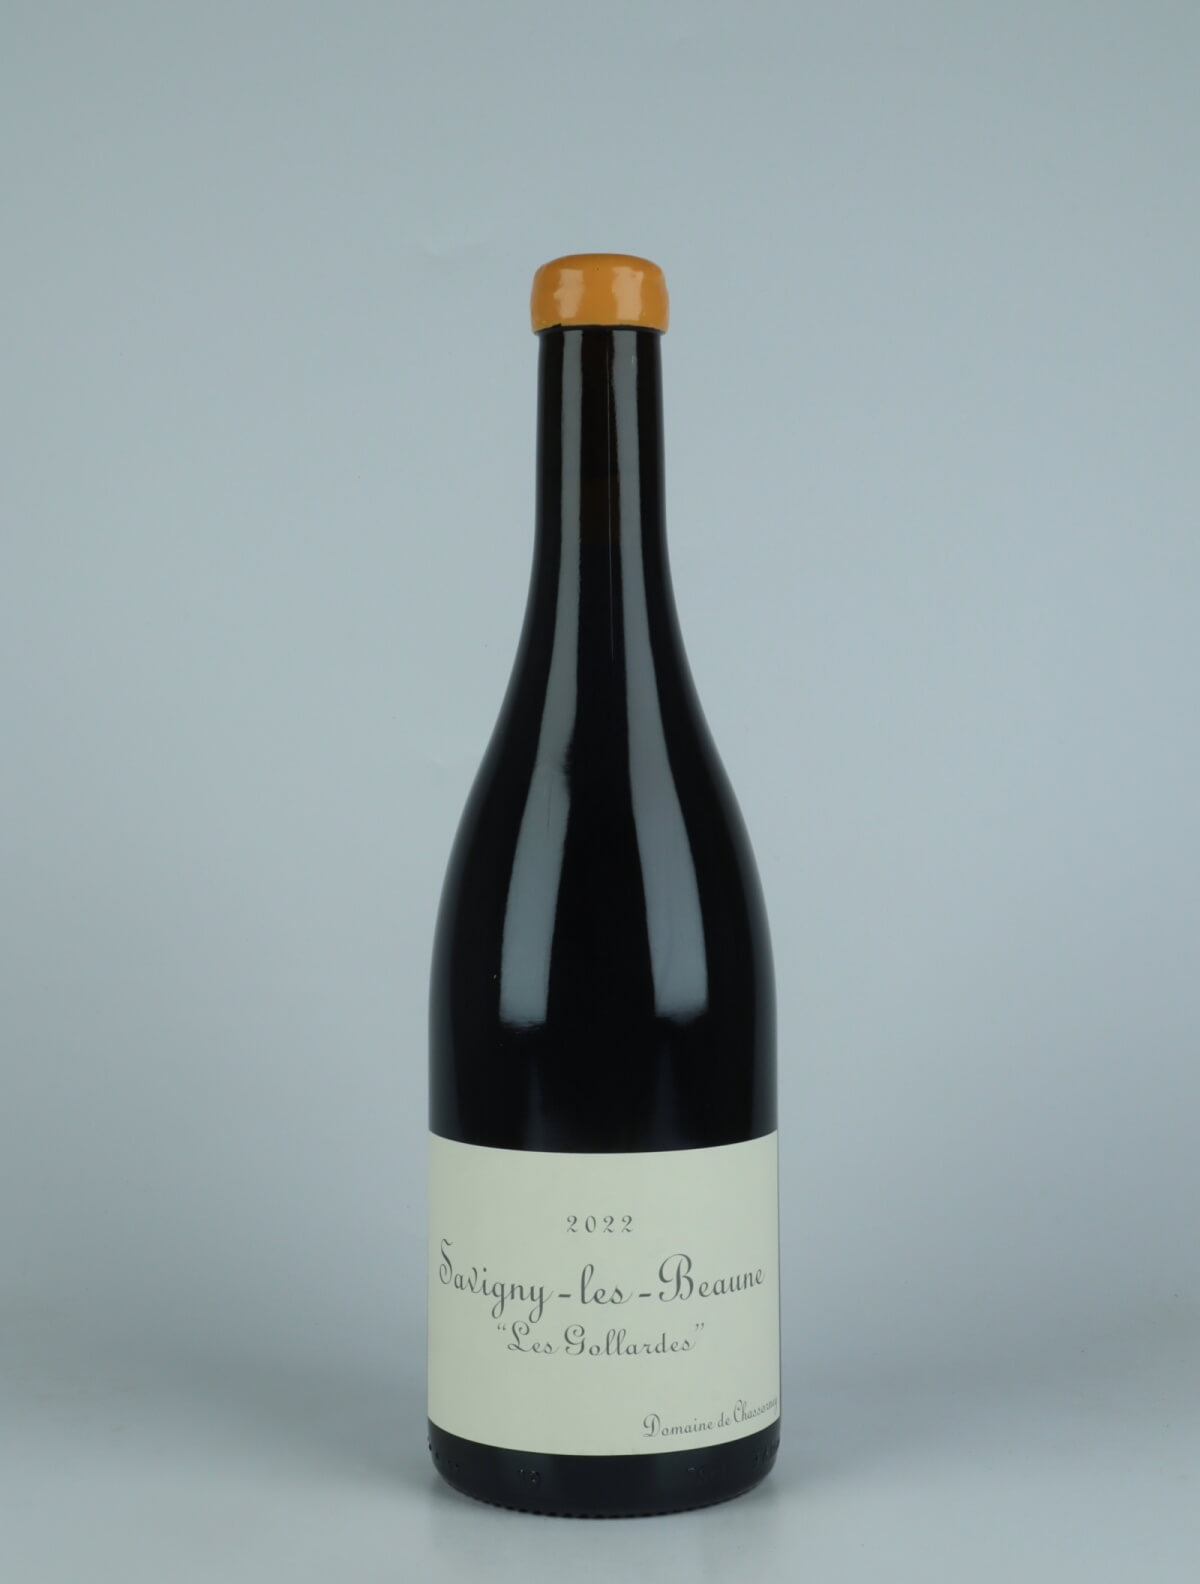 A bottle 2022 Savigny les Beaune - Les Gollardes Red wine from Domaine de Chassorney, Burgundy in France